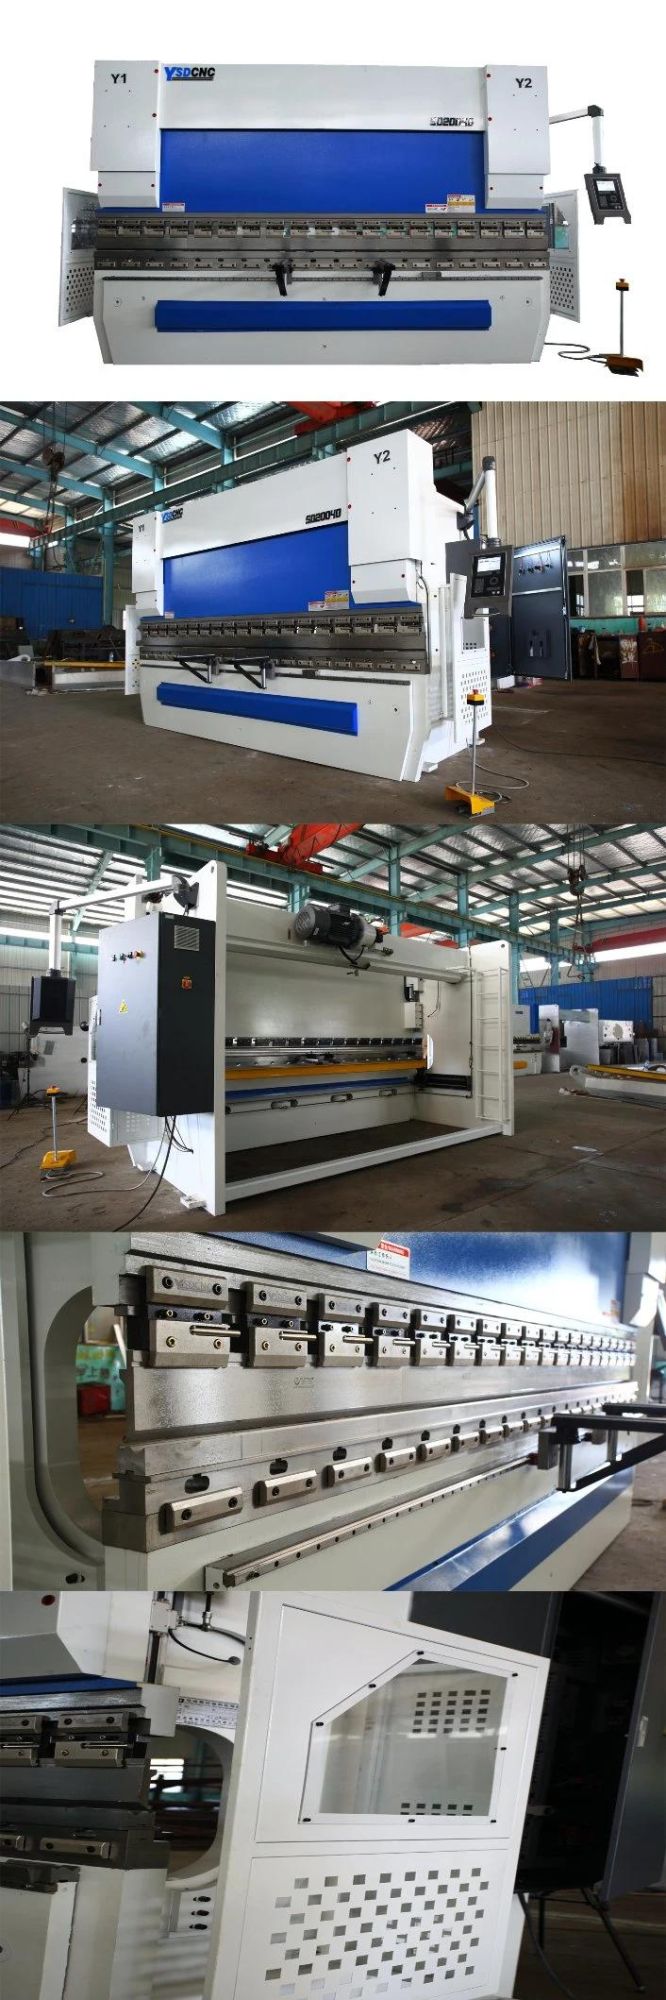 Hydraulic Plate Bending Machine with Da66t System 6+1 Axis